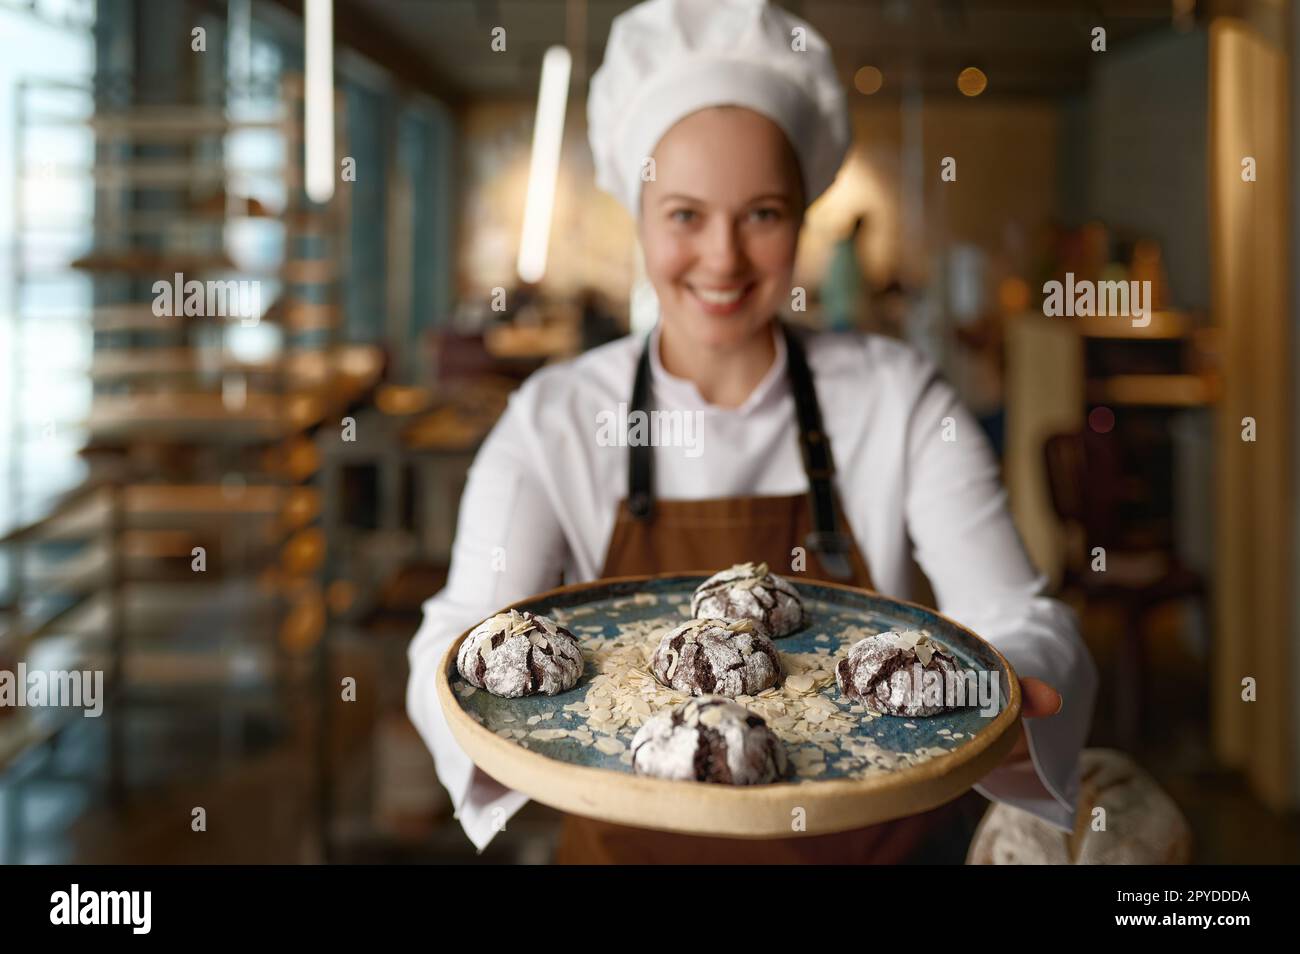 Pastry chef presenting freshly baked cookies at bakery kitchen Stock Photo